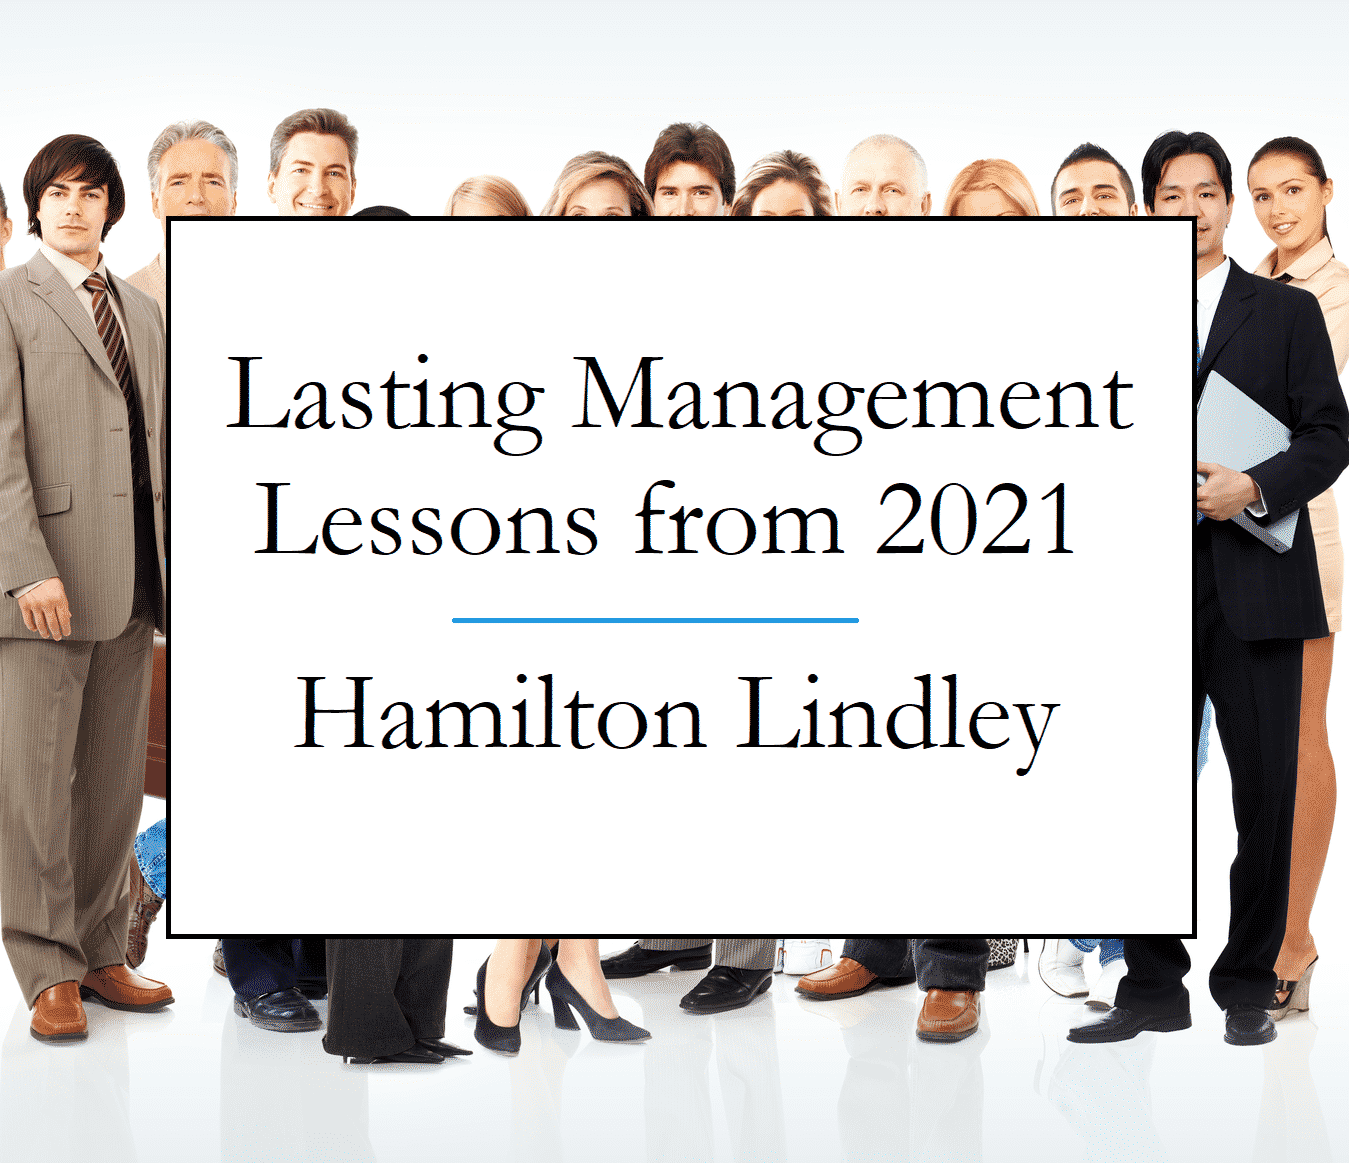 Lasting Management Lessons from 2021